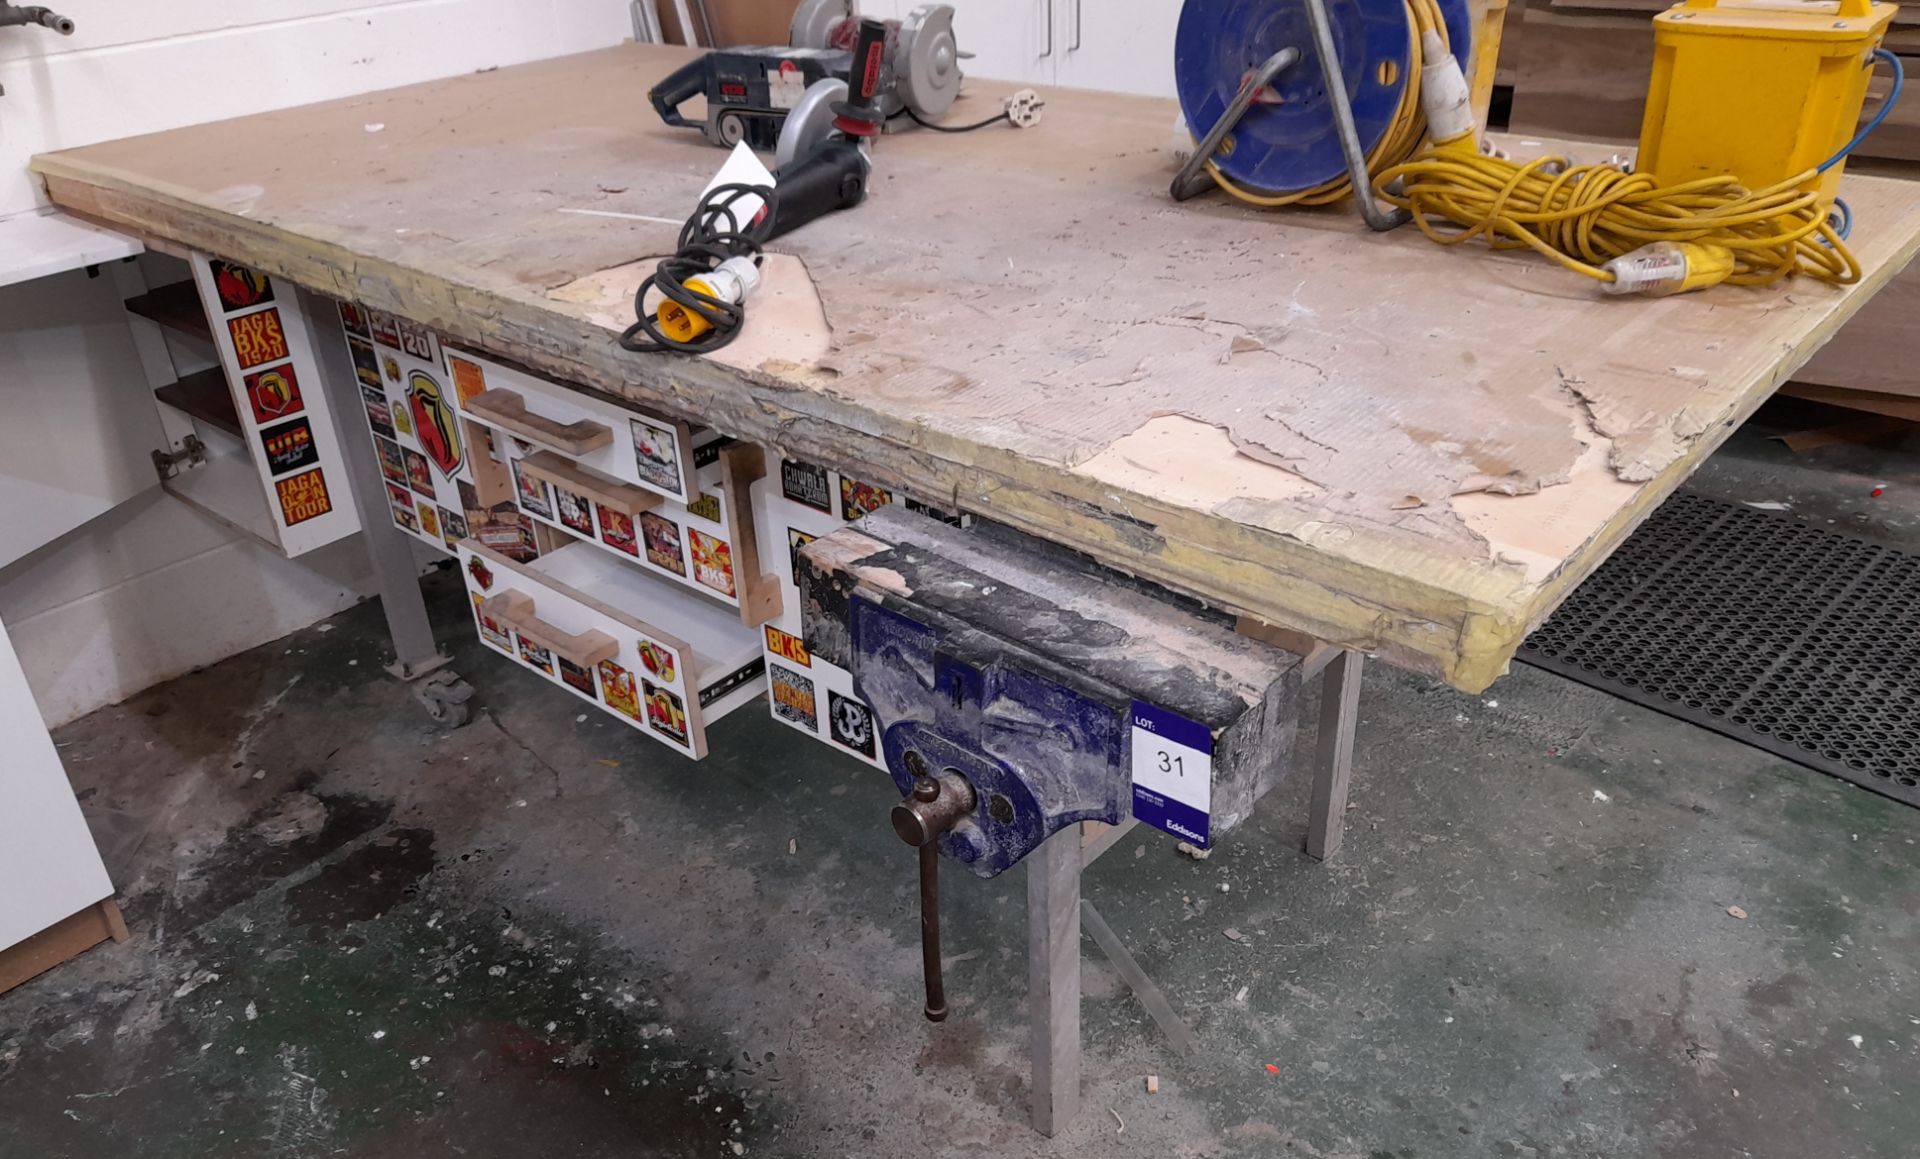 Joinery workbench with under storage and engineers